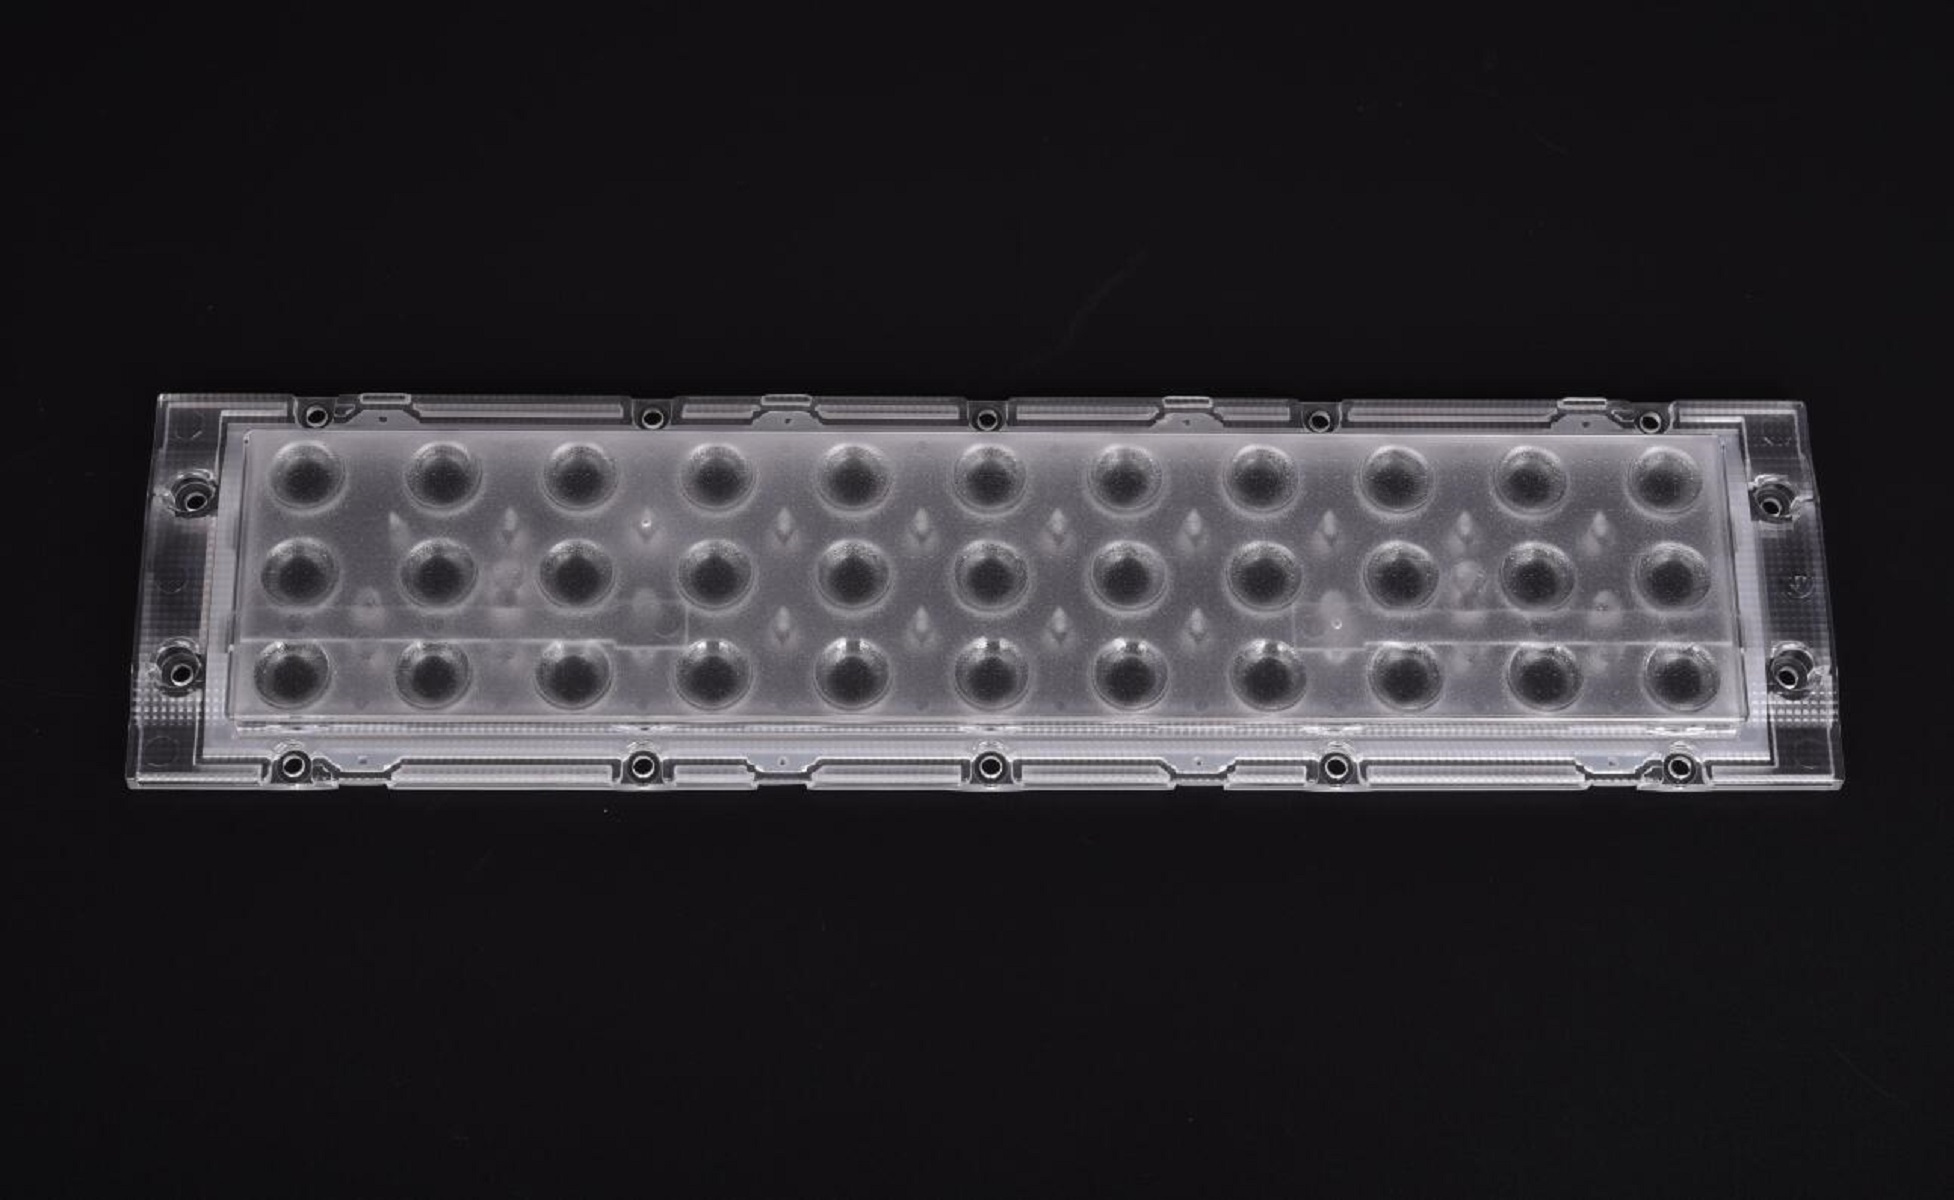 3x11 lens array 90° with IP66 protection and for IK08 test